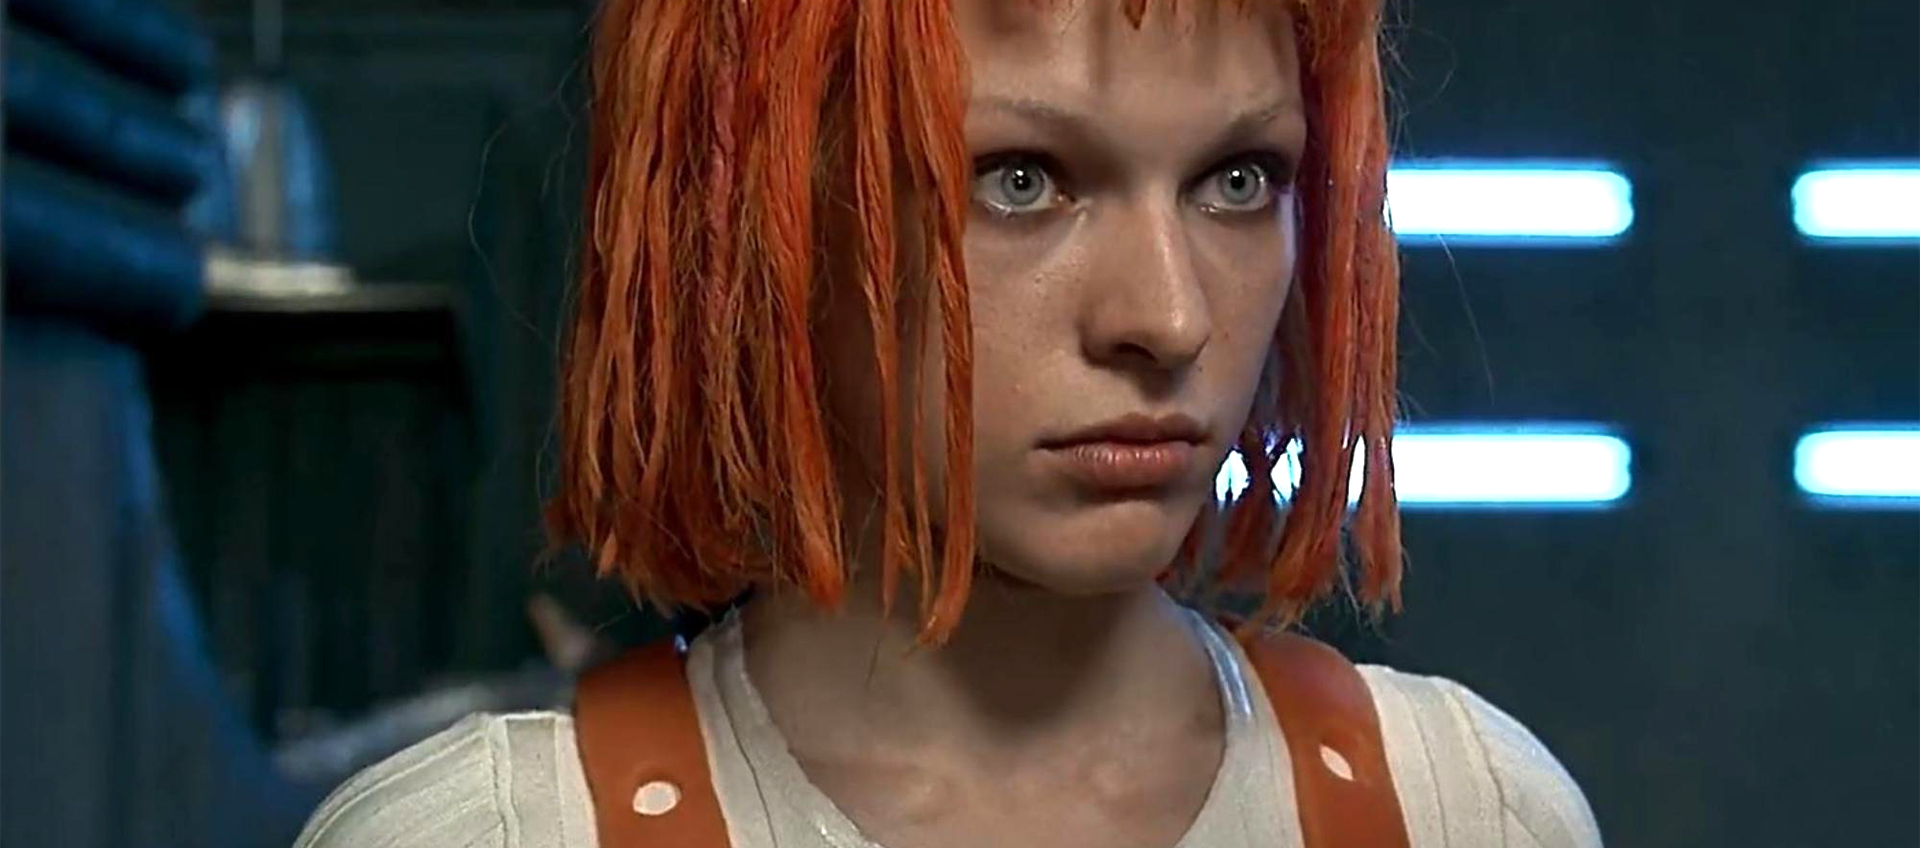 the fifth element full movie free stream